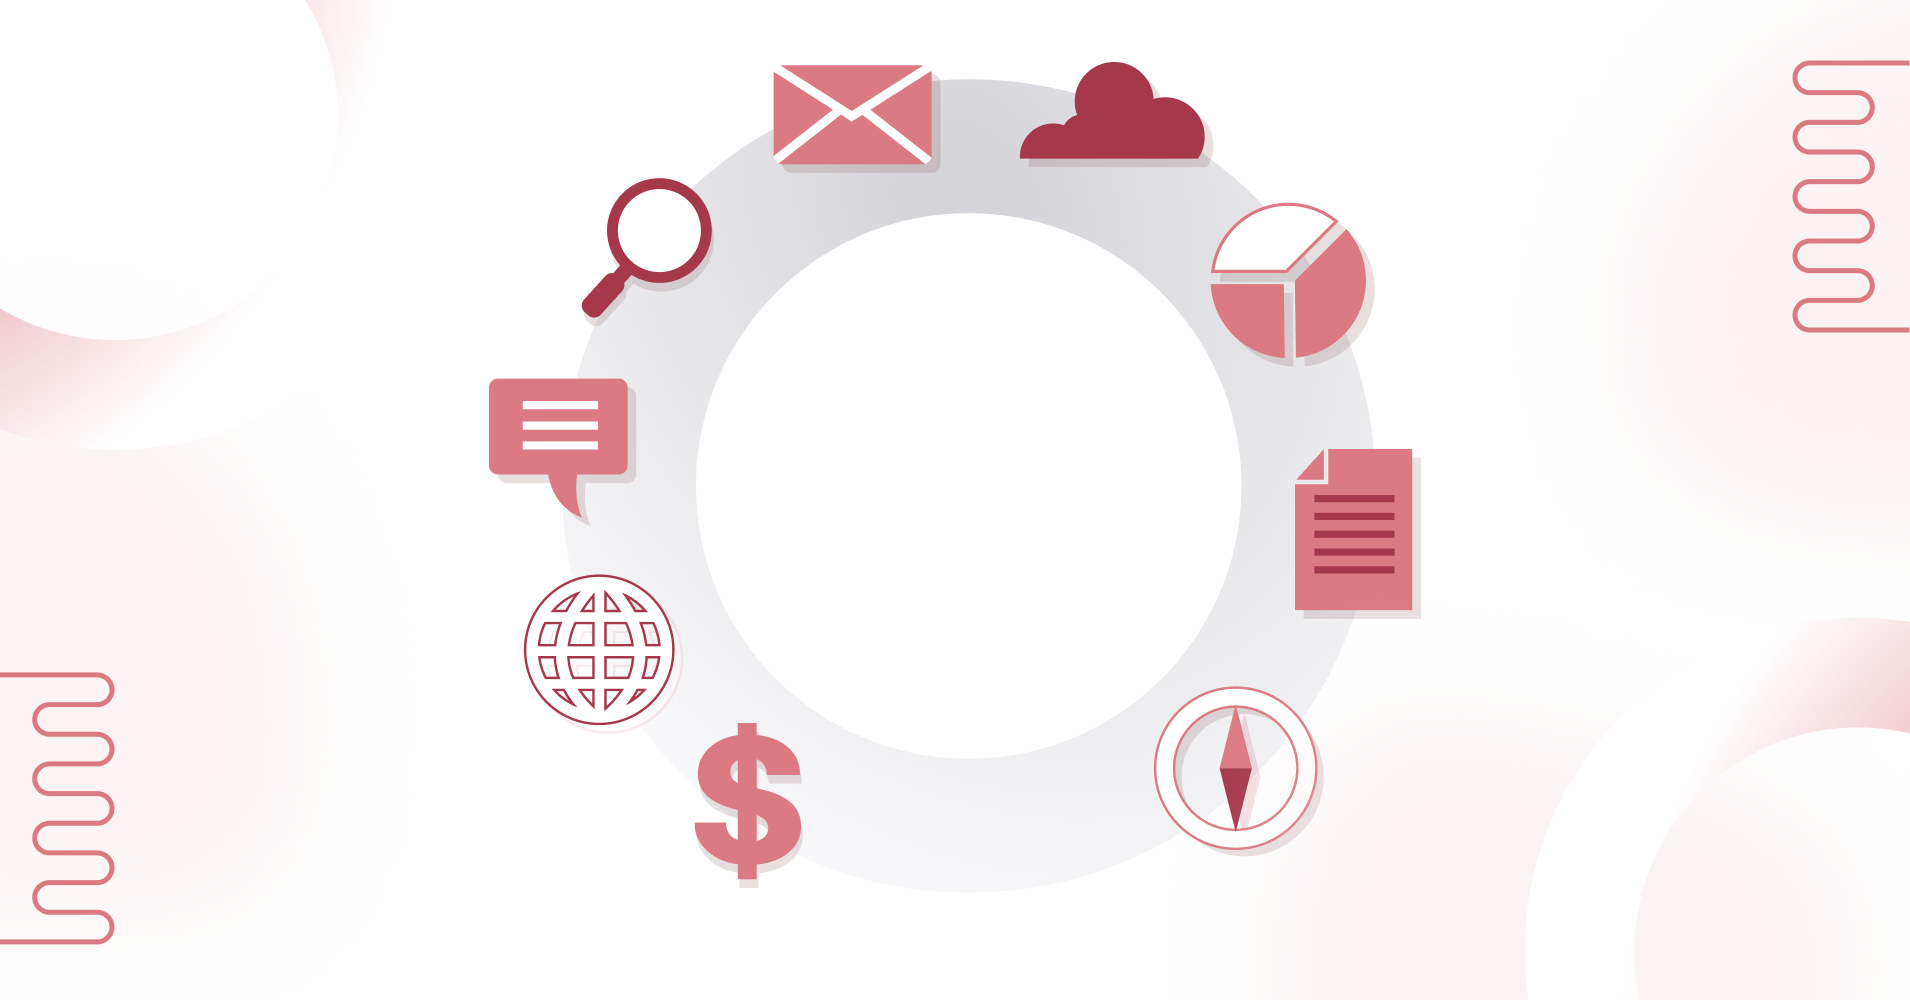 Tech-themed illustration with icons representing various technology and business areas in which Fractional CTO can help, arranged in a circular pattern on a light background.